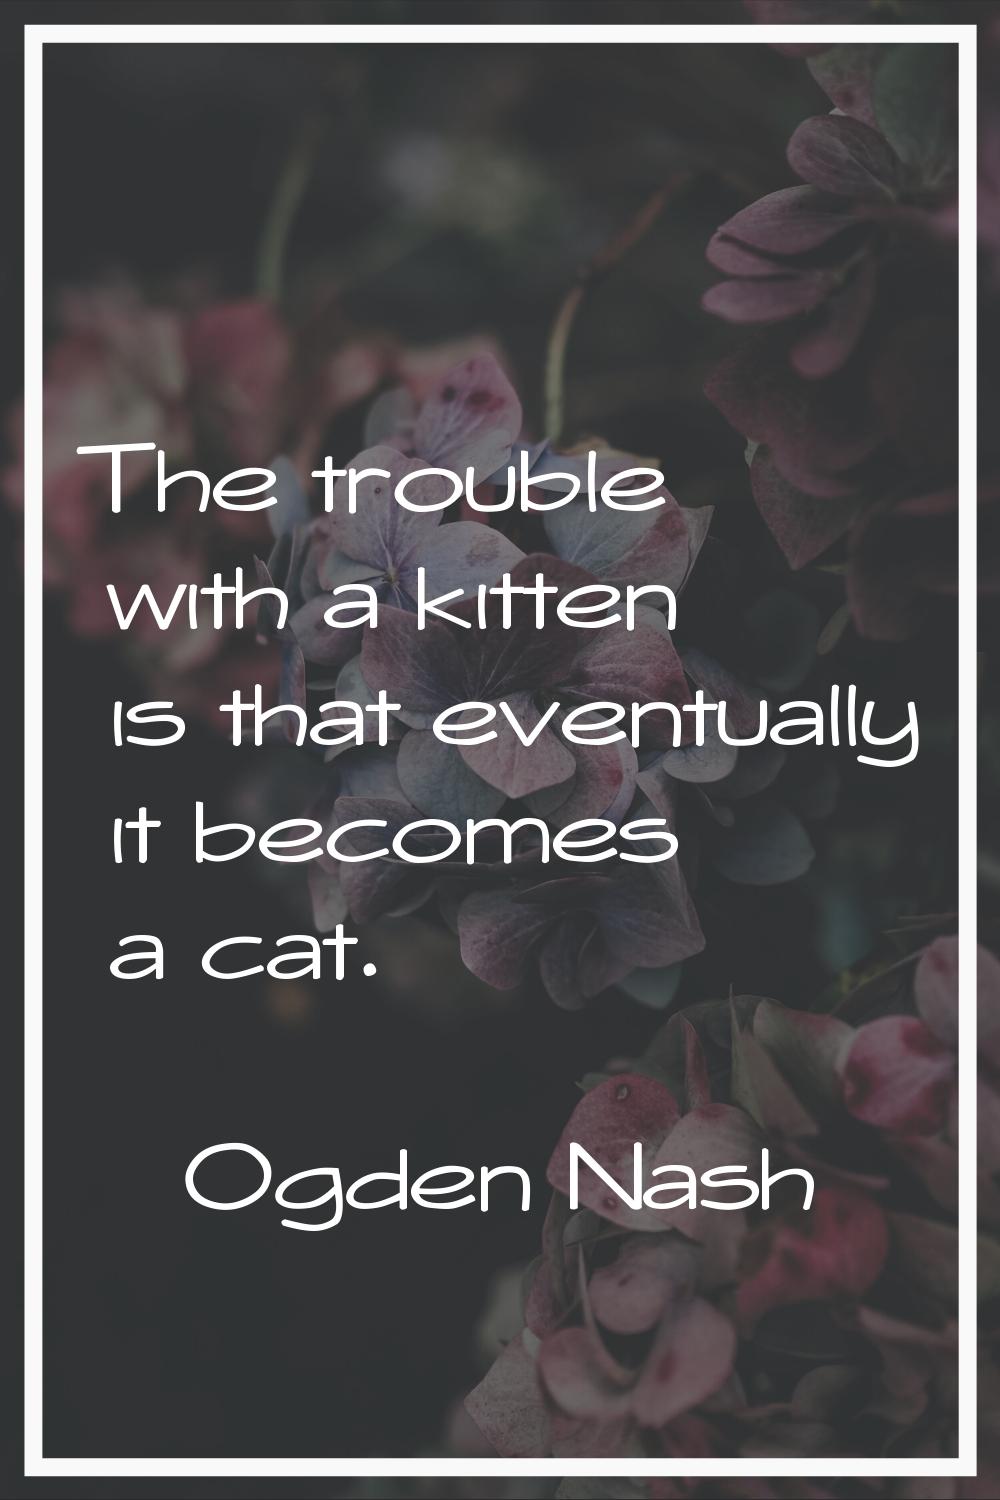 The trouble with a kitten is that eventually it becomes a cat.